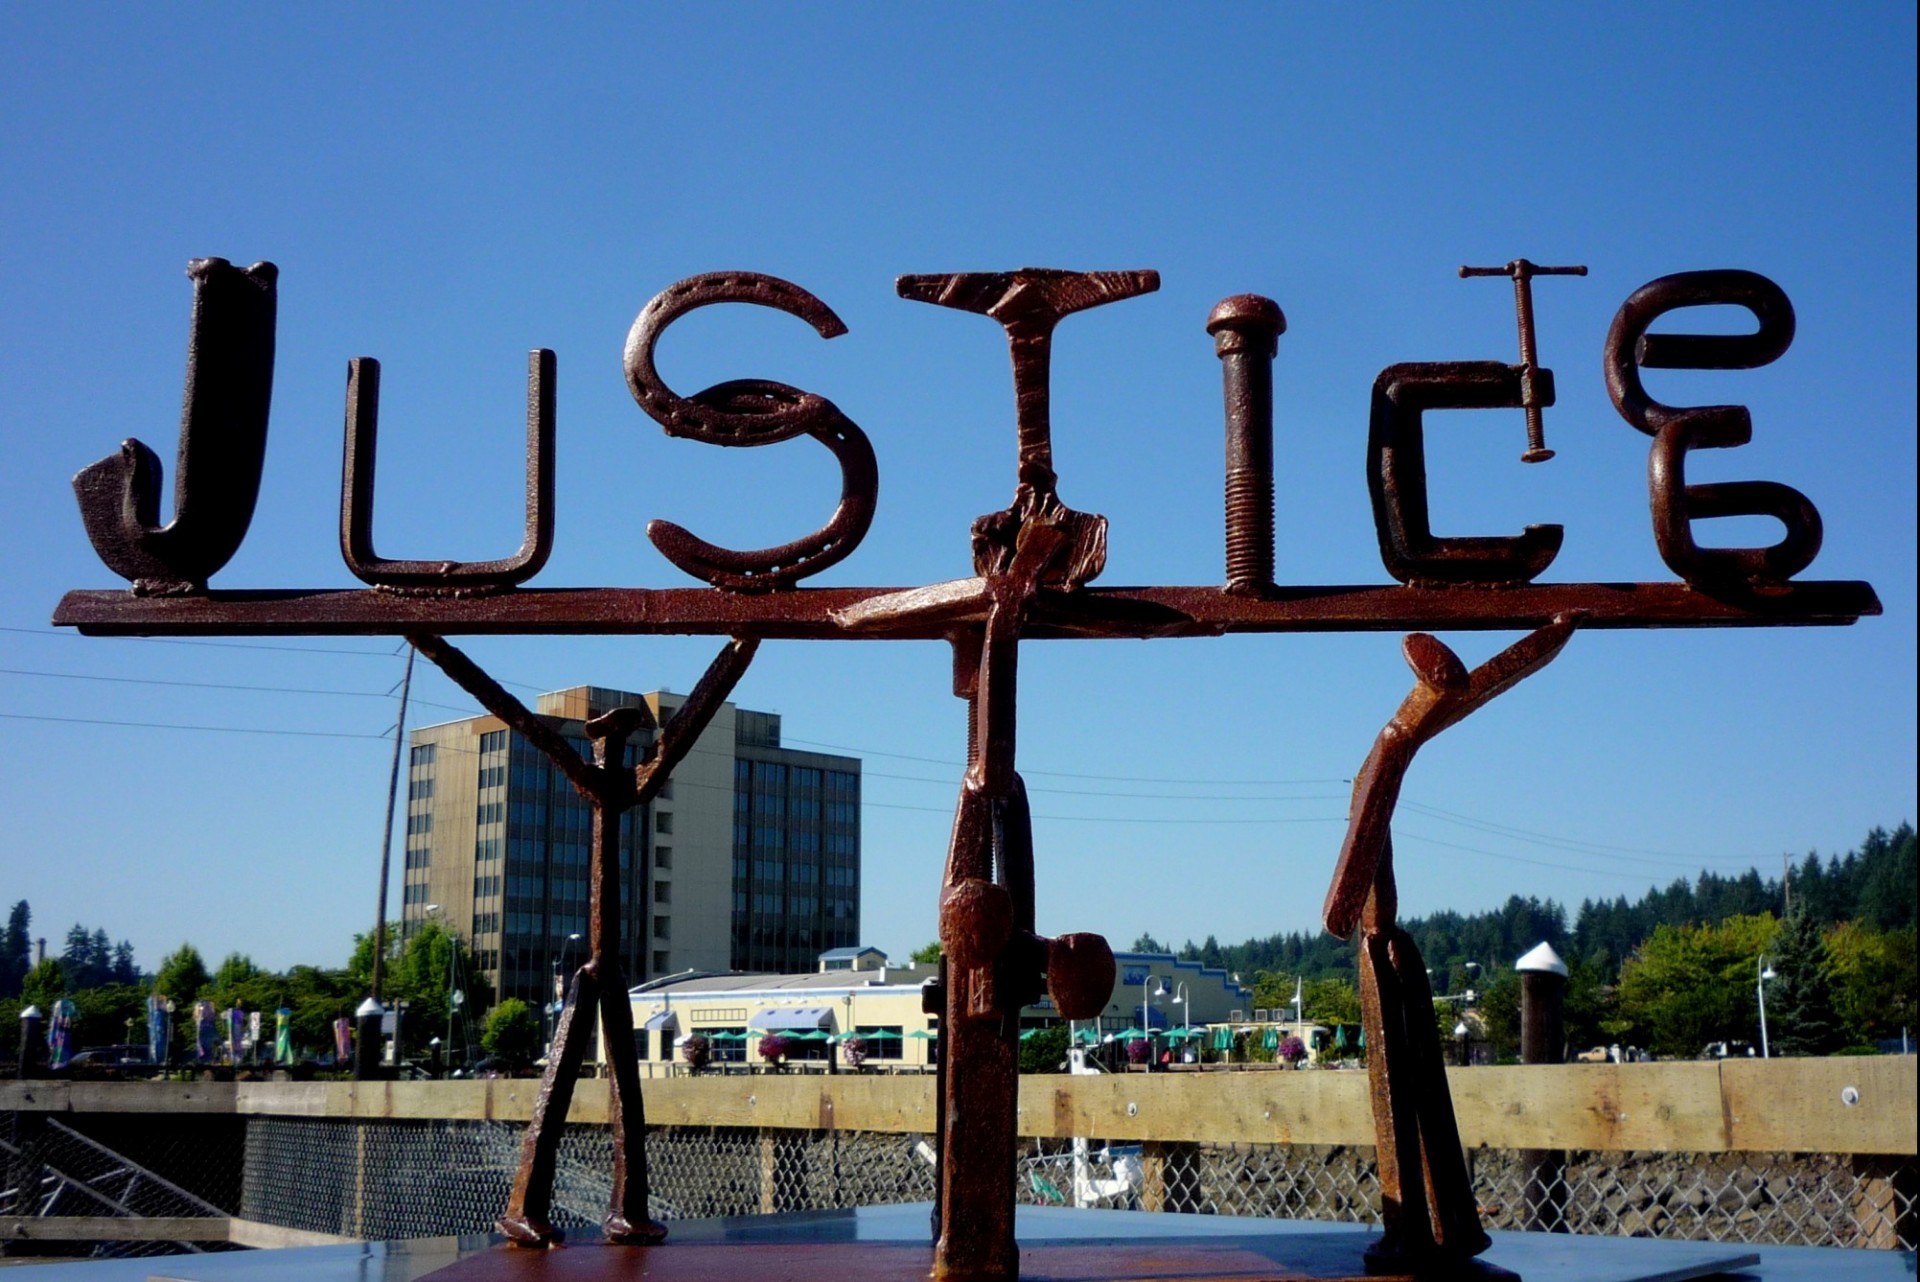 Sculpture of the word 'justice'